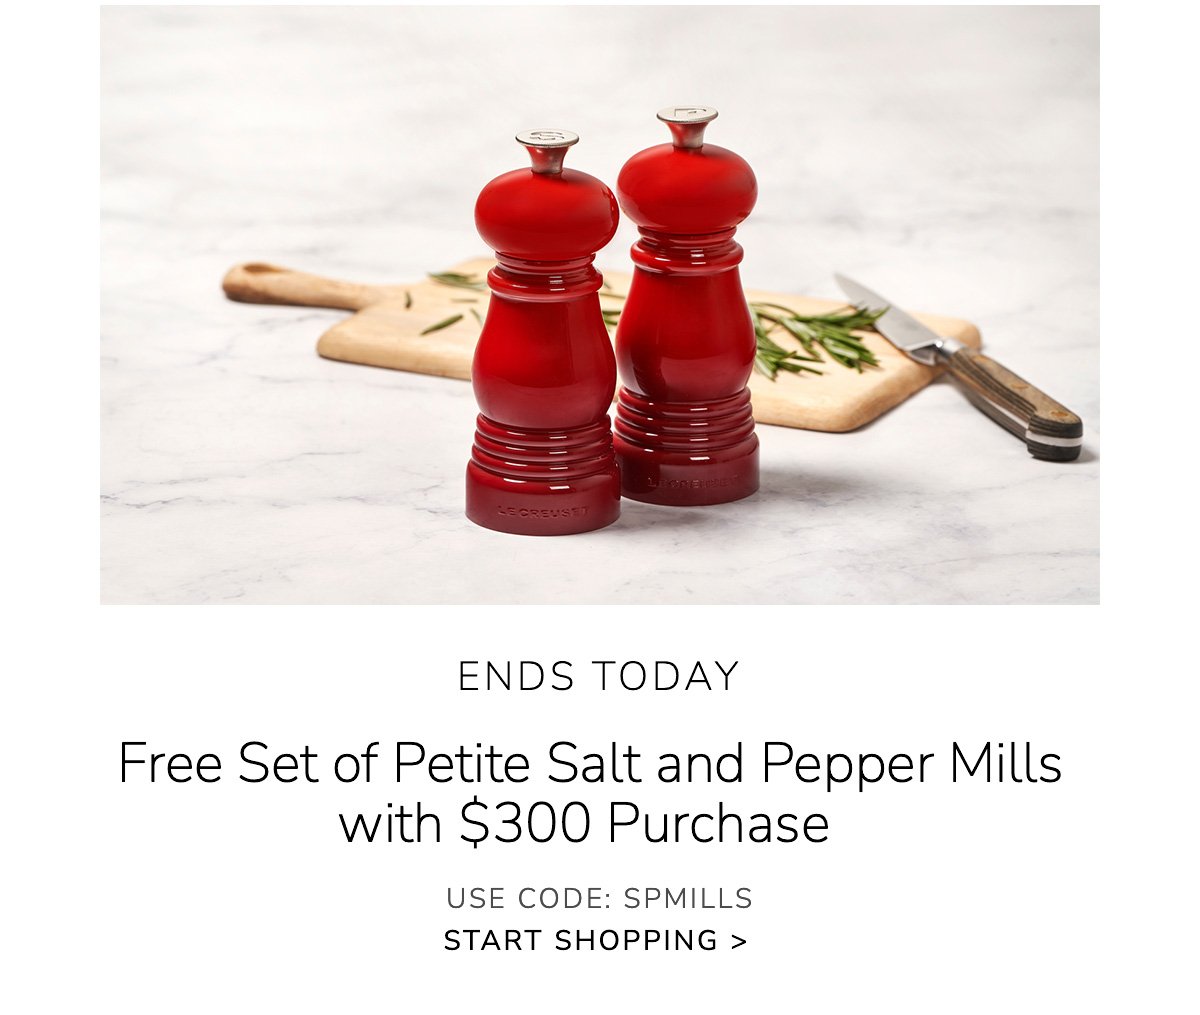 ENDS TODAY - Free Petite Salt & Pepper Mills With \\$300 Purchase - Use Code: spmills - Shop Now